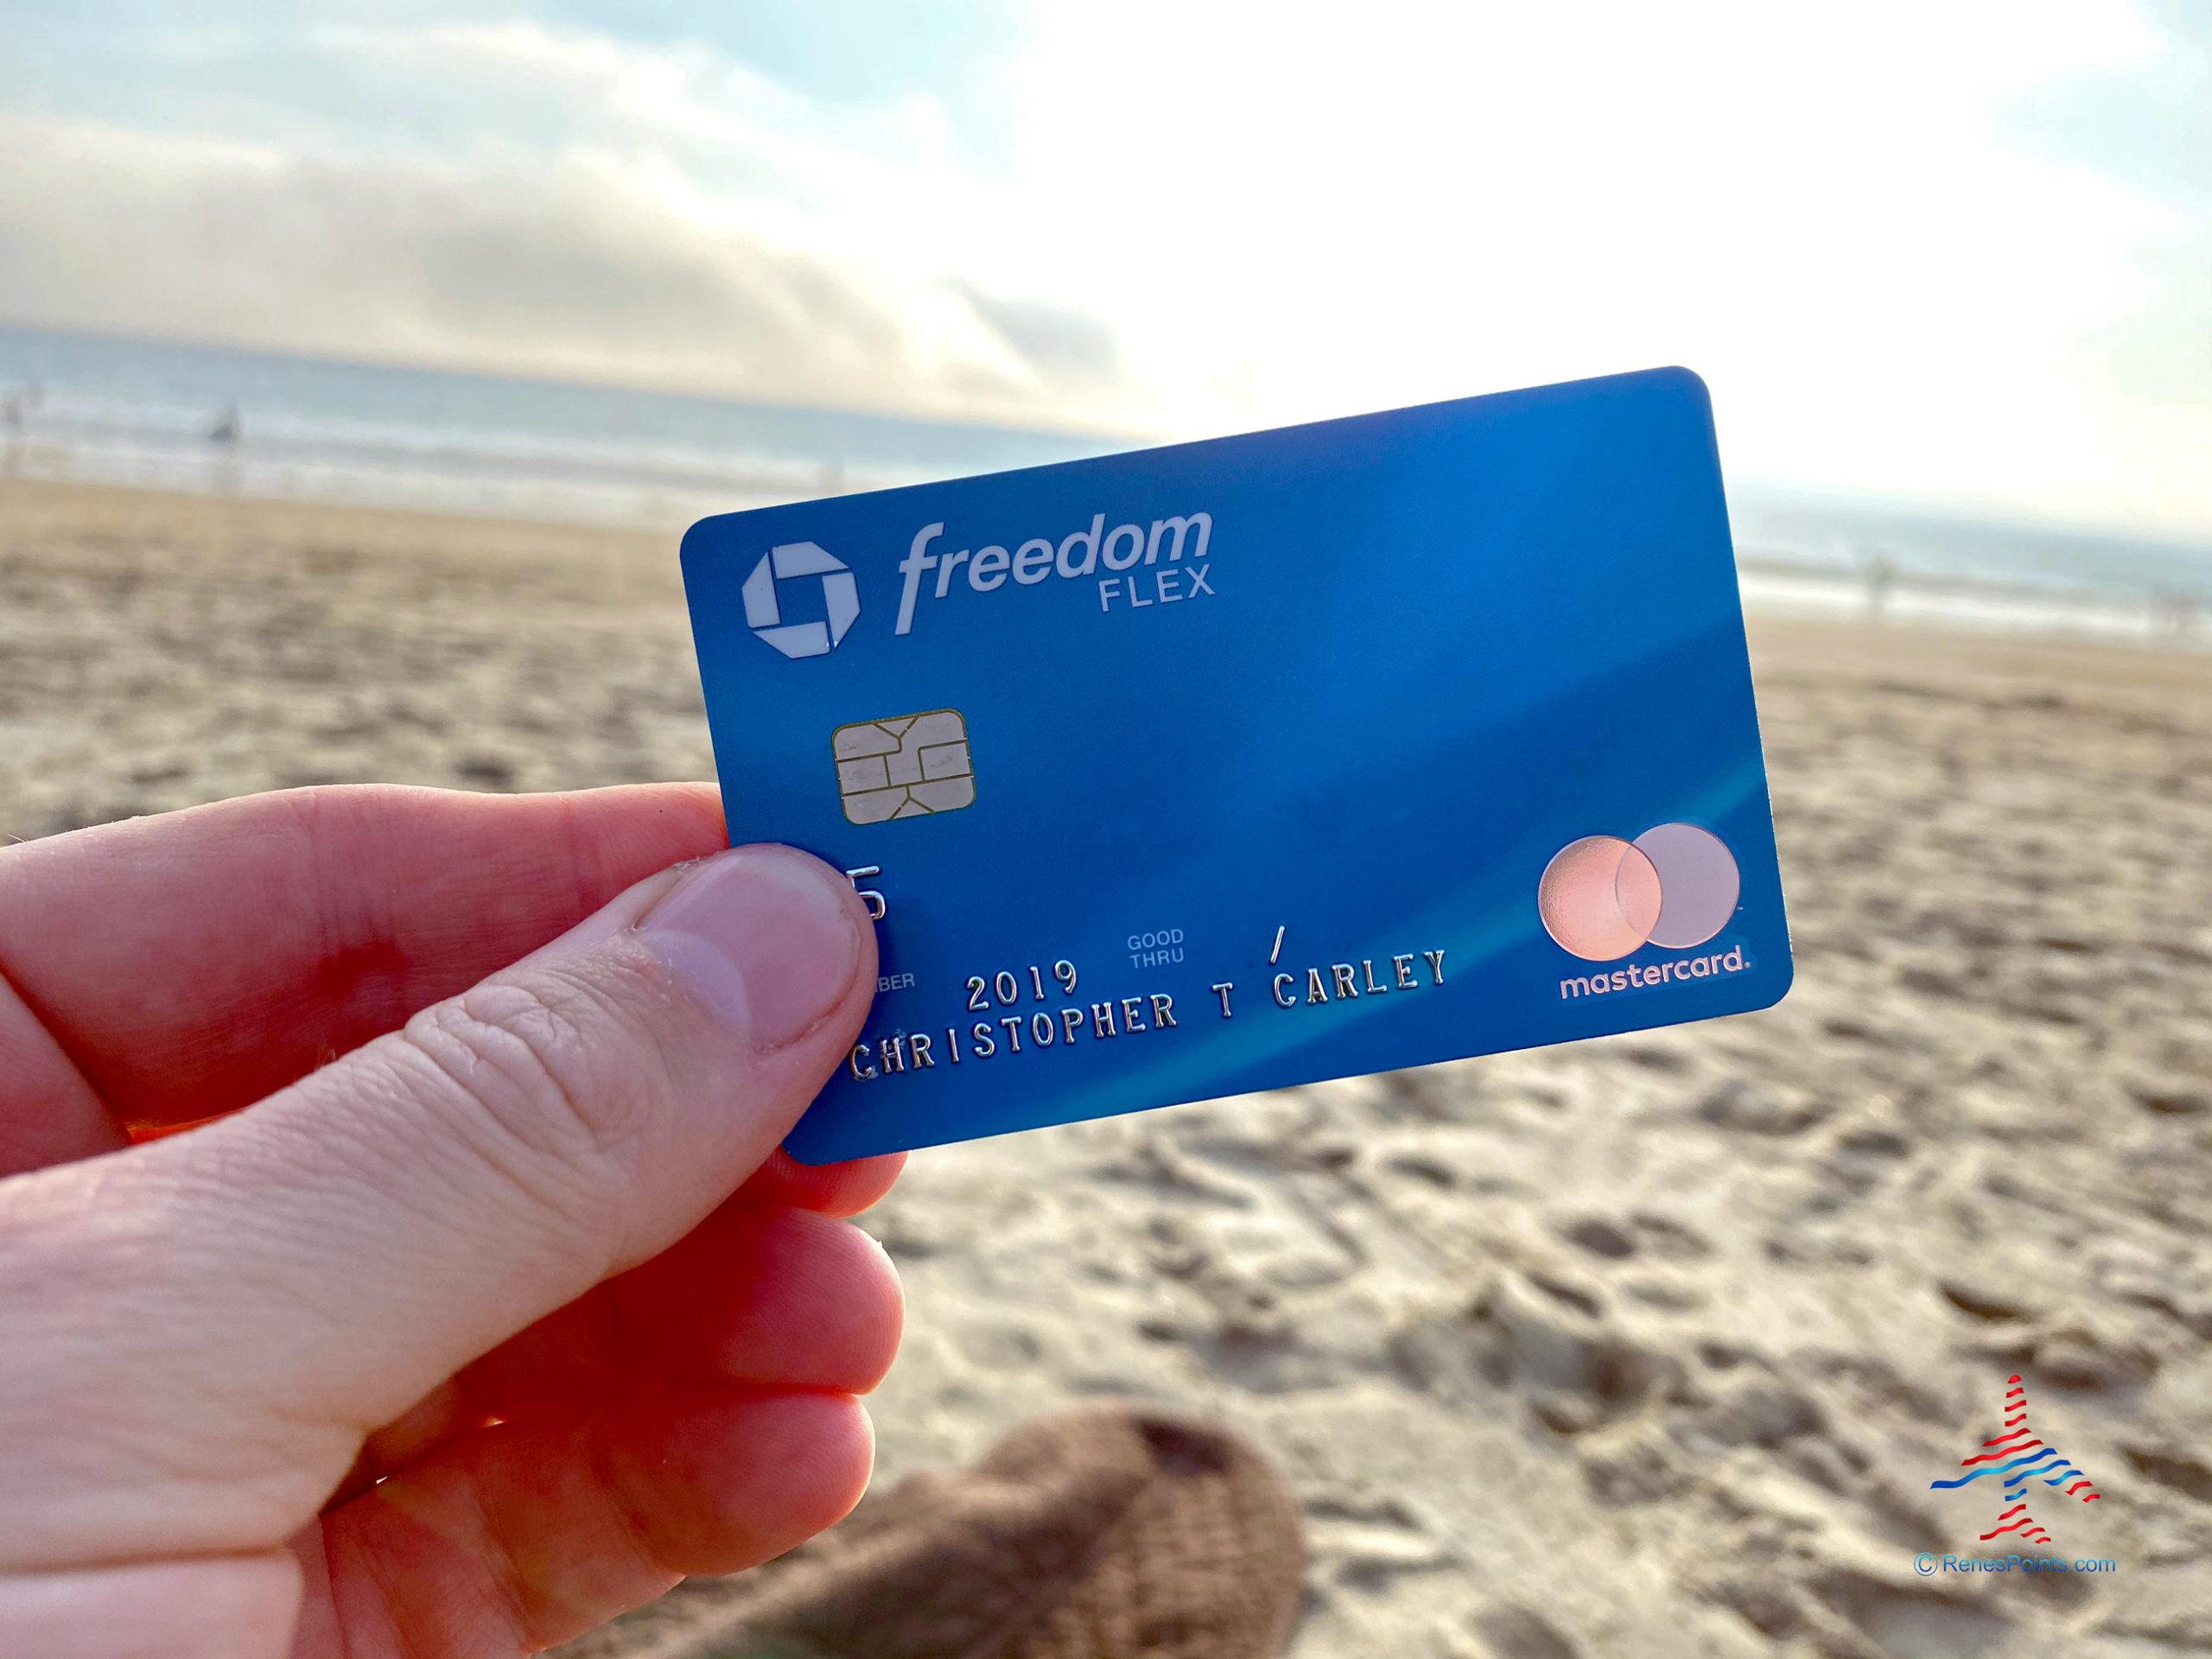 The Chase Freedom Flex℠ card earns Ultimate Rewards points -- which can help make a dream beach vacation come true!